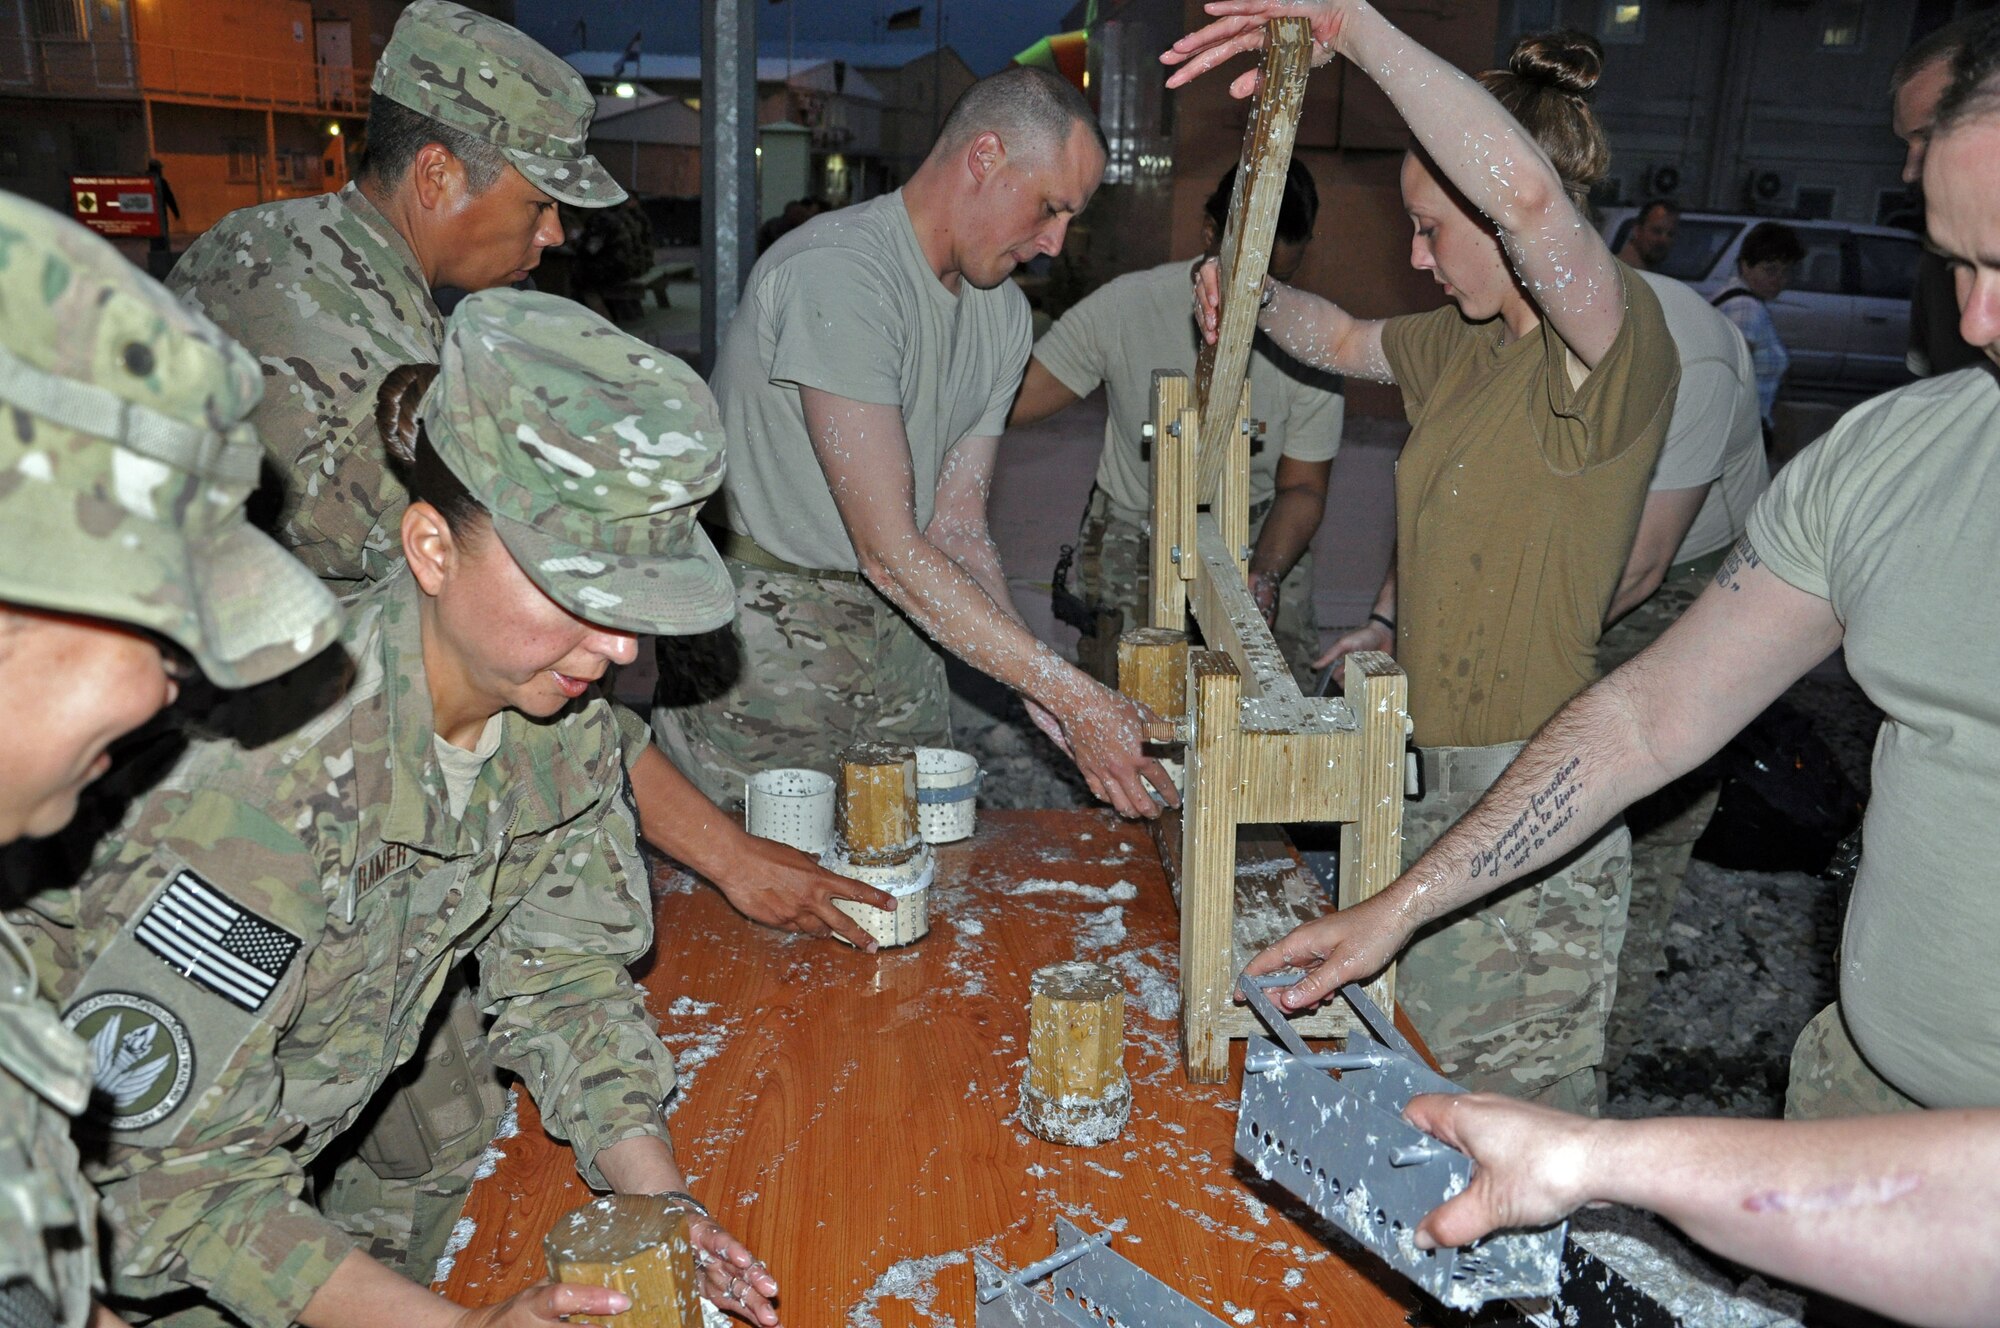 Members of NATO Air Training Command-Afghanistan work together to make fuel pucks and bricks at Kabul International Airport, Afghanistan May 3, 2013. As part of Operation Outreach, a community service organization, members of NATC-A spend every Friday and Saturday evening turning shredded paper, sawdust and water into pucks and bricks that are donated around Kabul and can provide fuel for up to 20 or 40 minutes respectively. (U.S. Air Force photo/ Staff Sgt. Jordan Nestor)